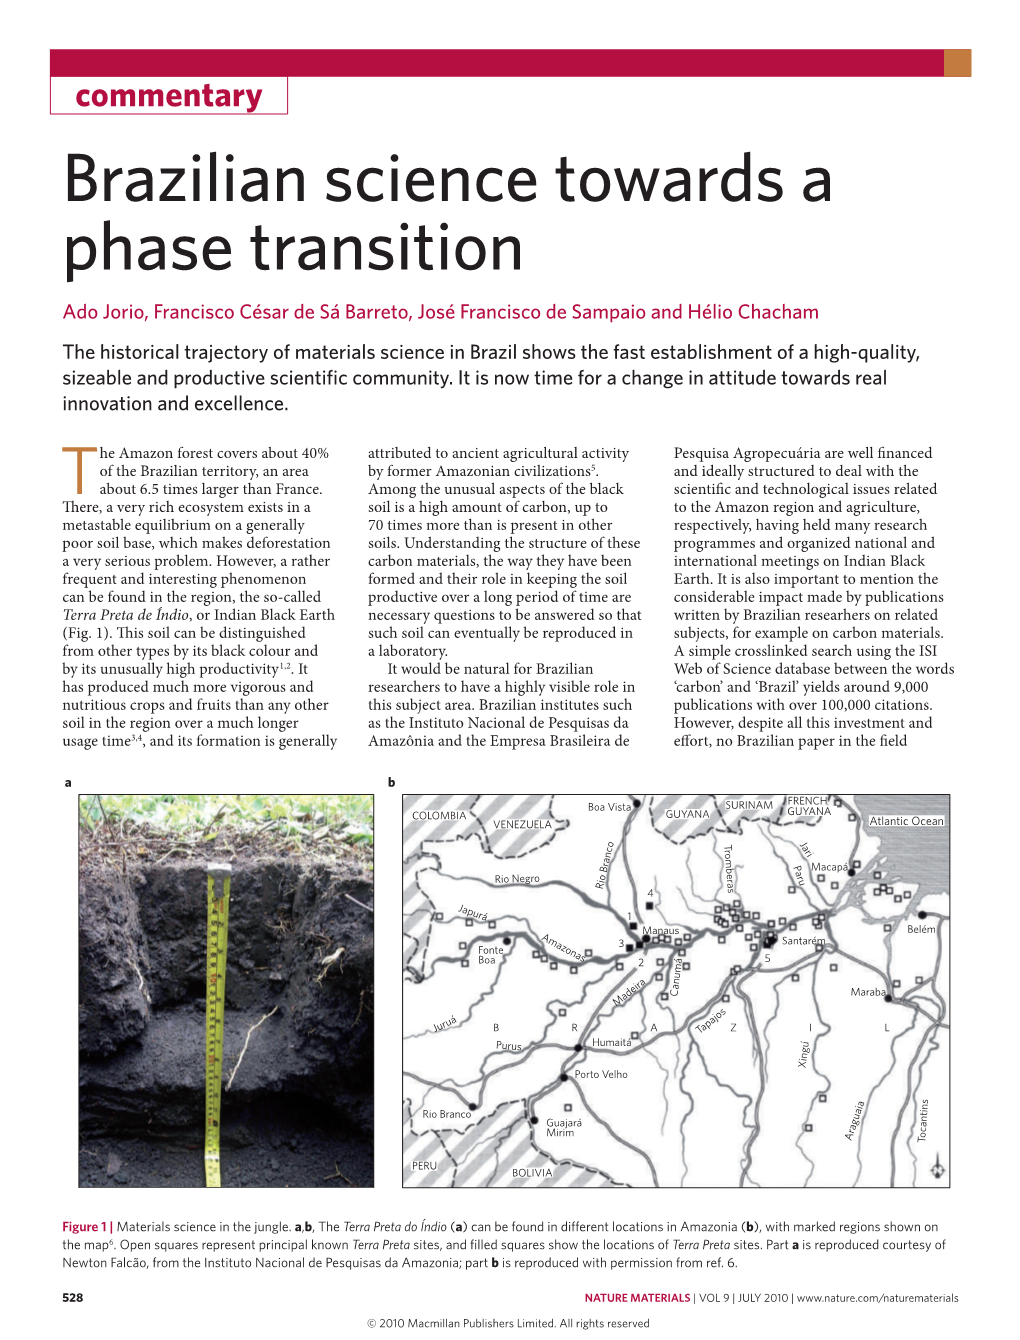 Brazilian Science Towards a Phase Transition